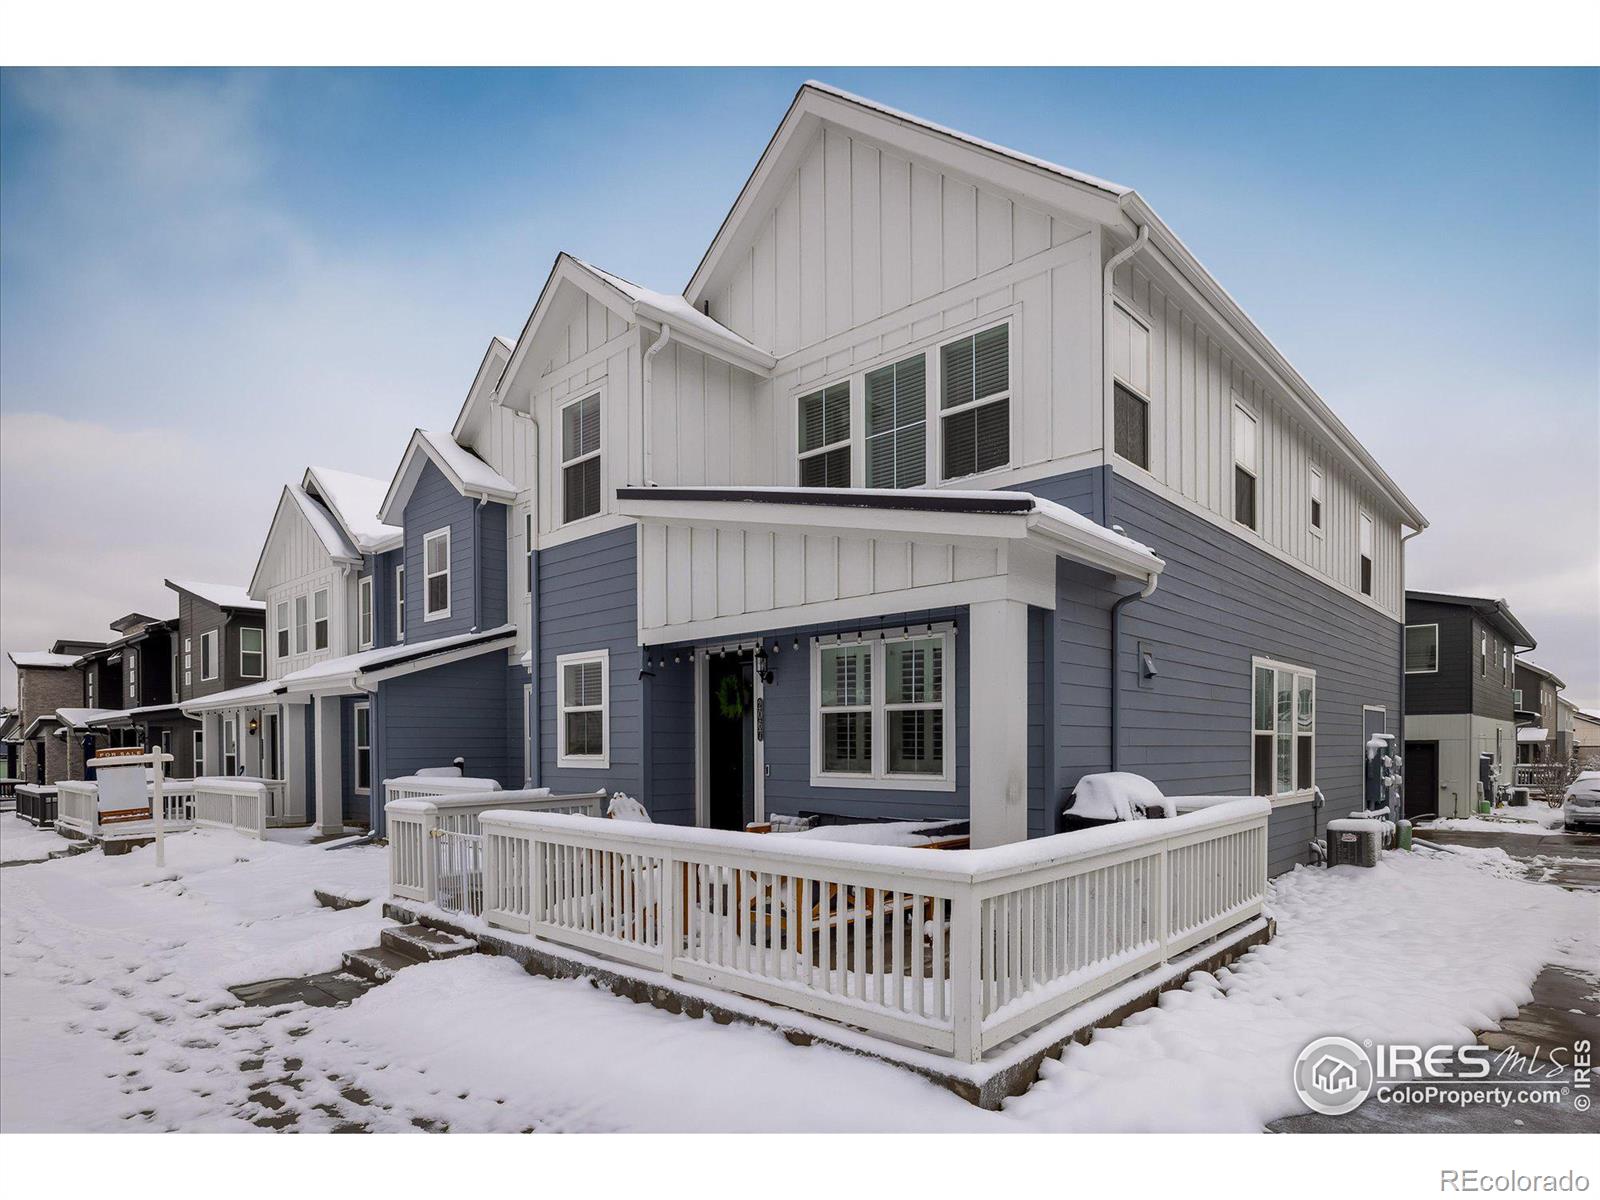 Report Image for 2067 S Vance Way,Lakewood, Colorado